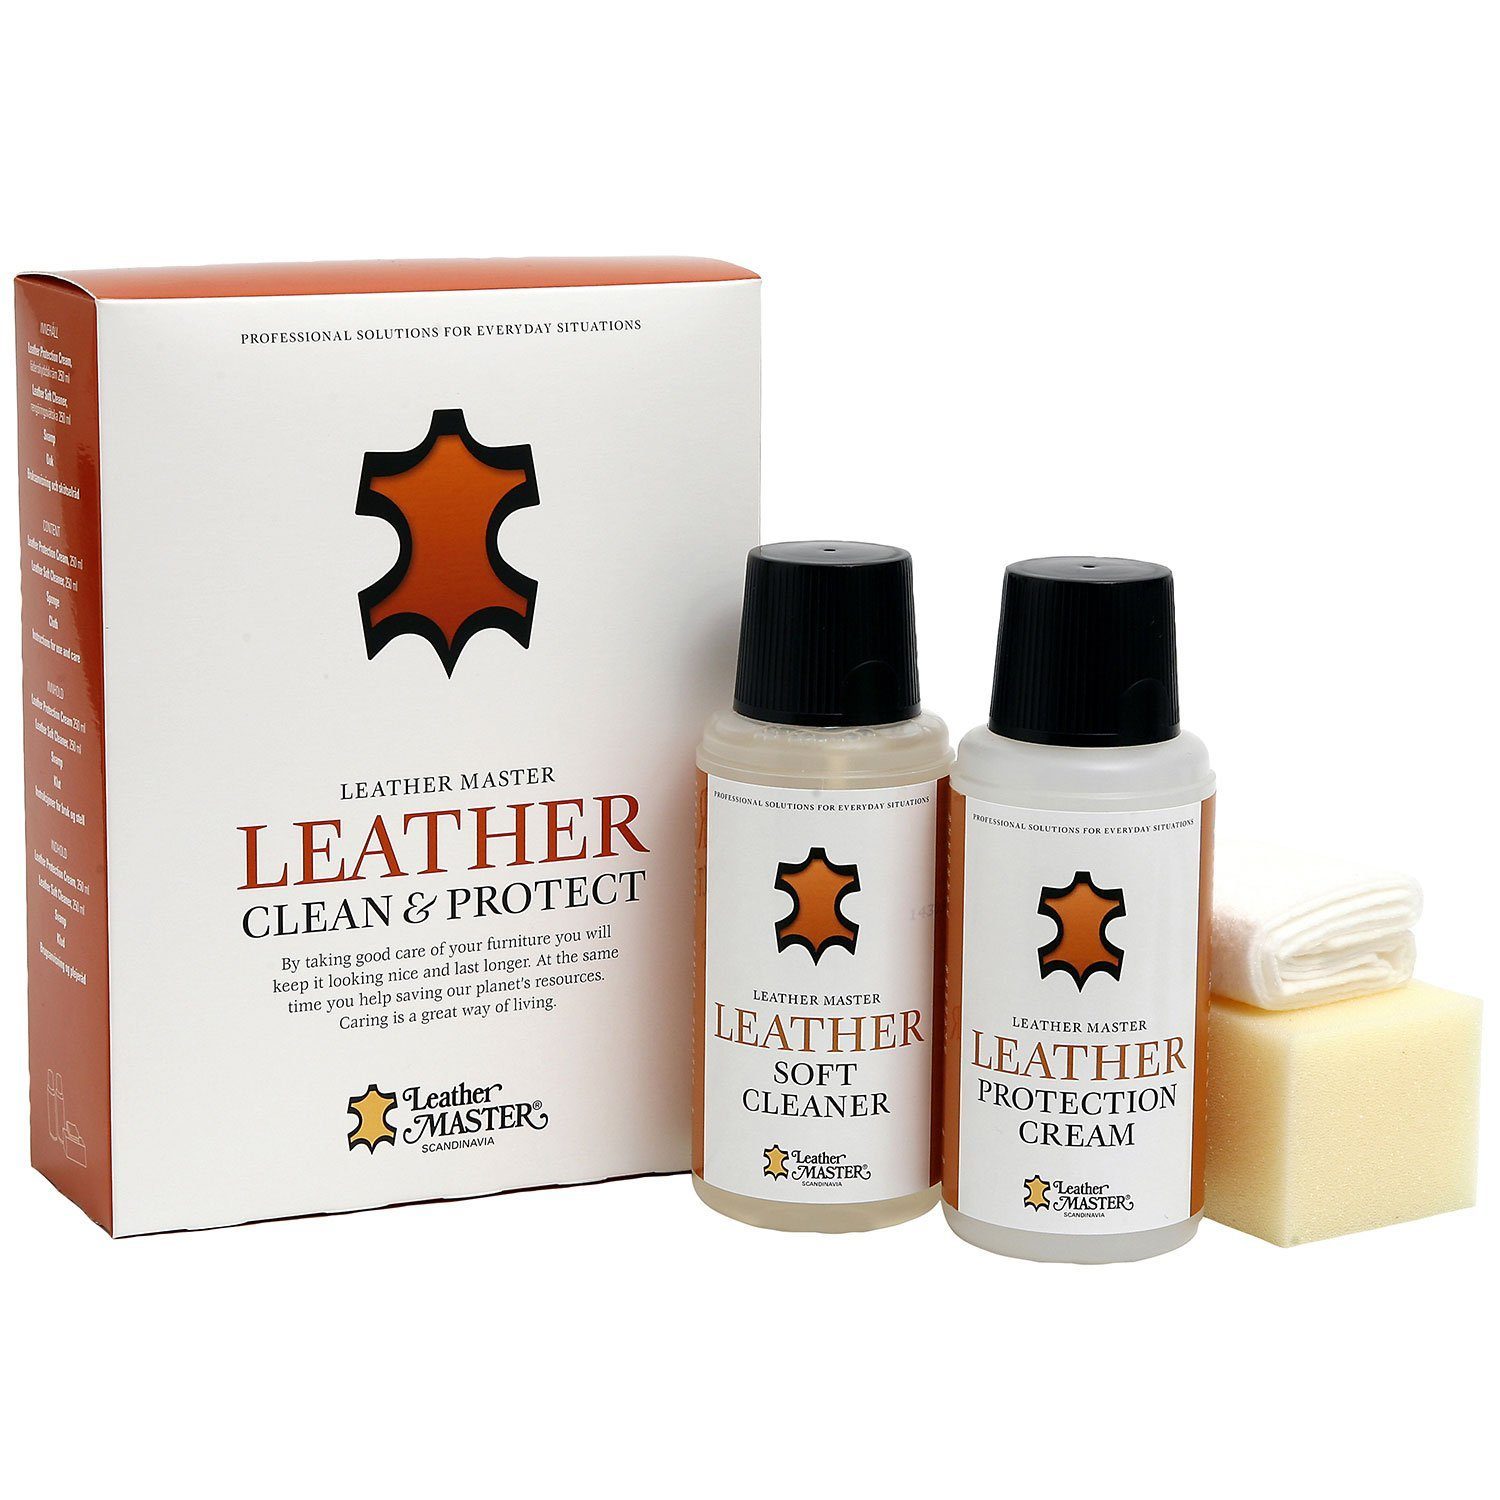 Leather Cleaning & Protection från Leather Master.